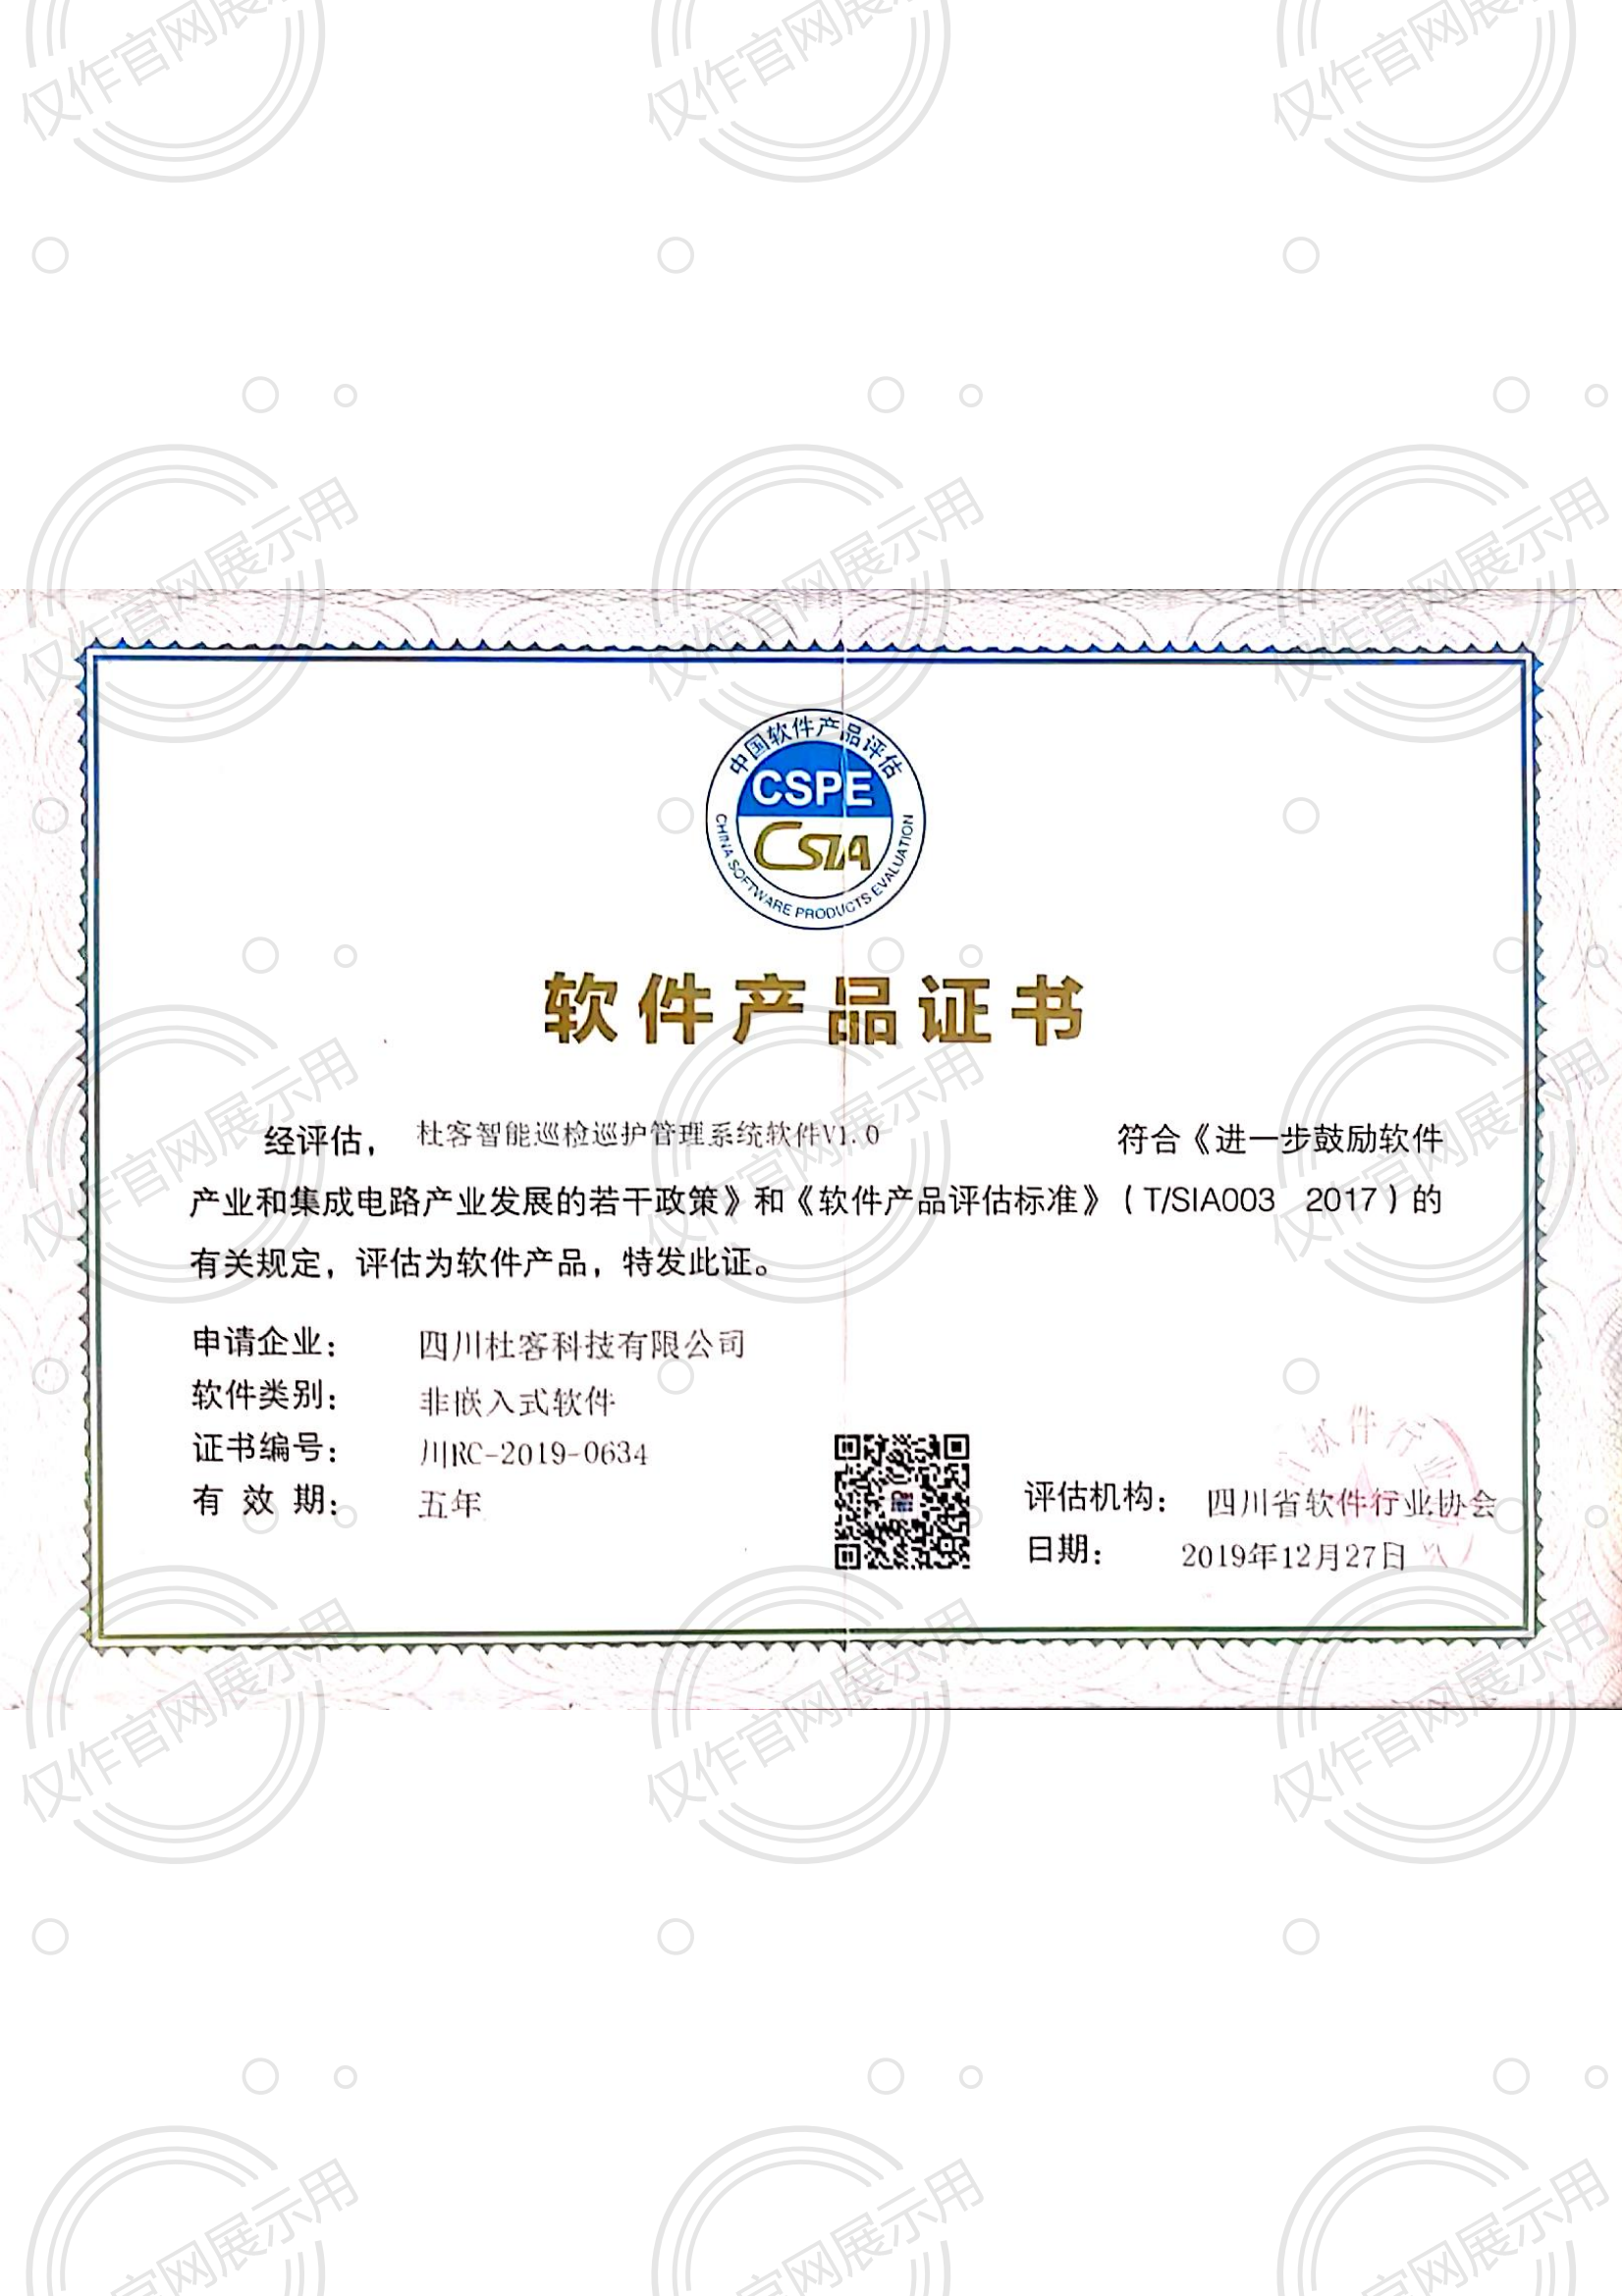 Software Product Certificate